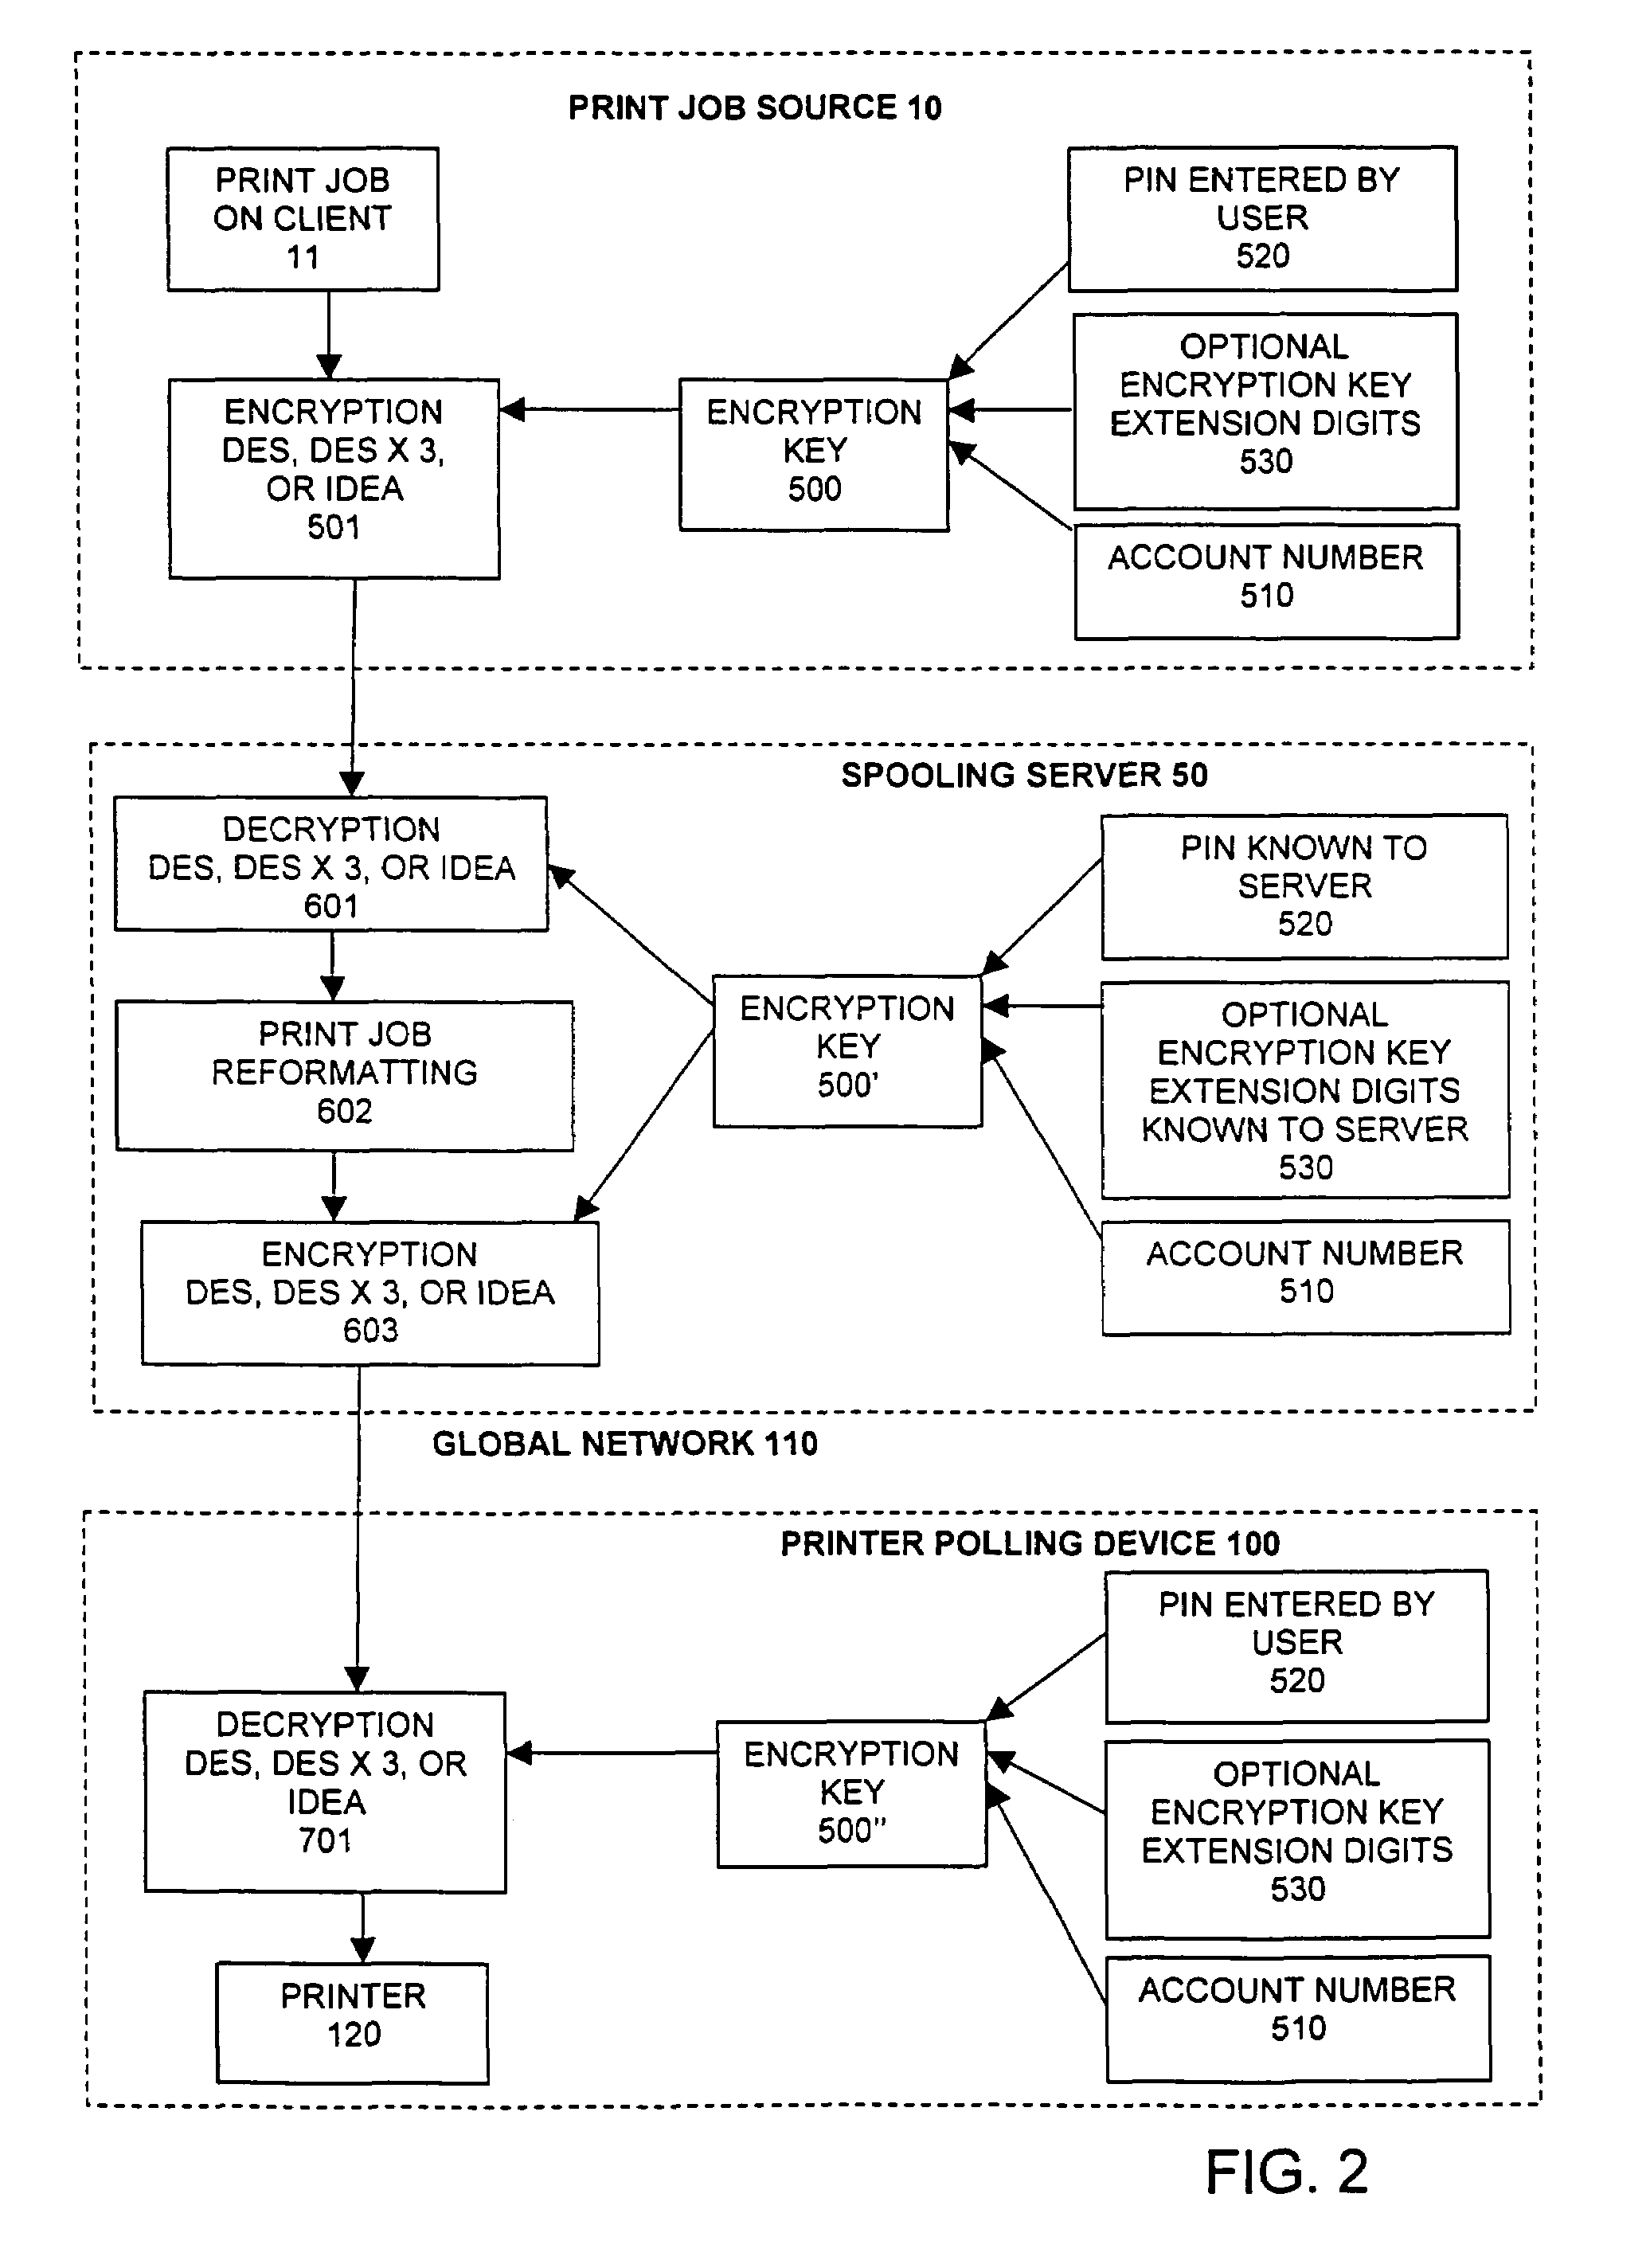 Spooling server apparatus and methods for receiving, storing, and forwarding a print job over a network